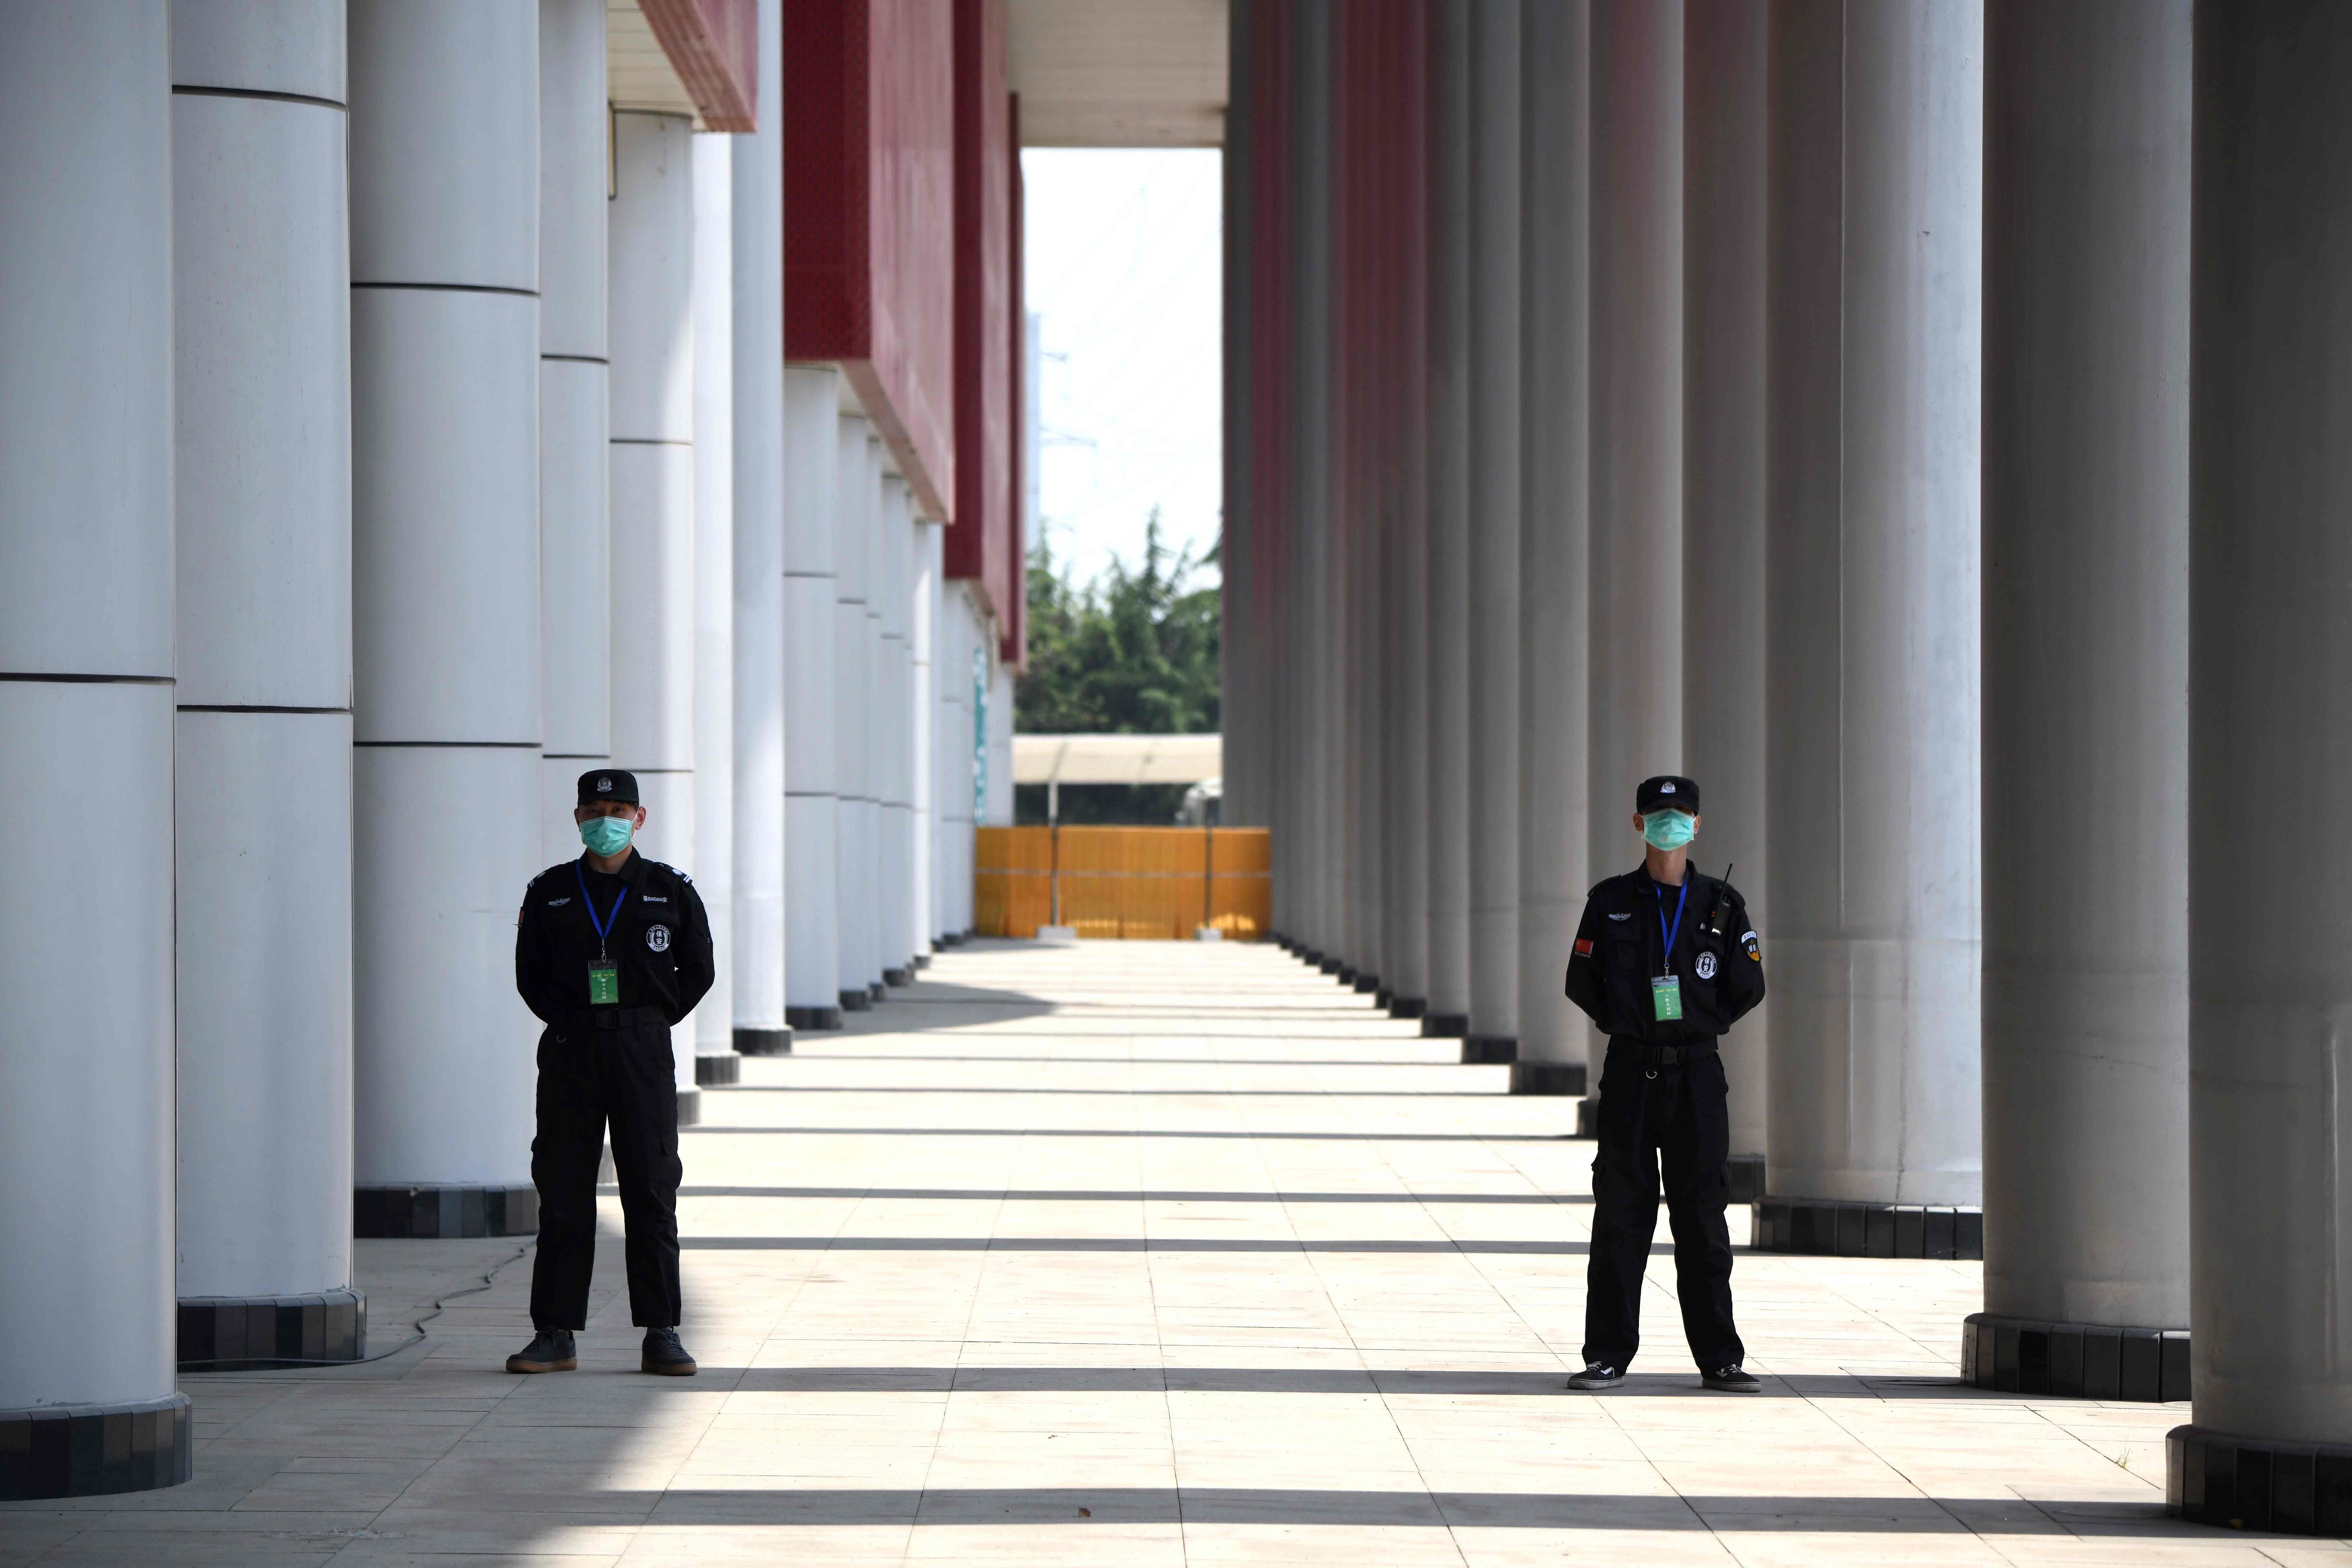 Security personnel stand outside a field hospital that had offered beds for COVID-19 coronavirus patients during the height of the crisis in Wuhan in China’s central Hubei province. (Credit: AFP Photo)